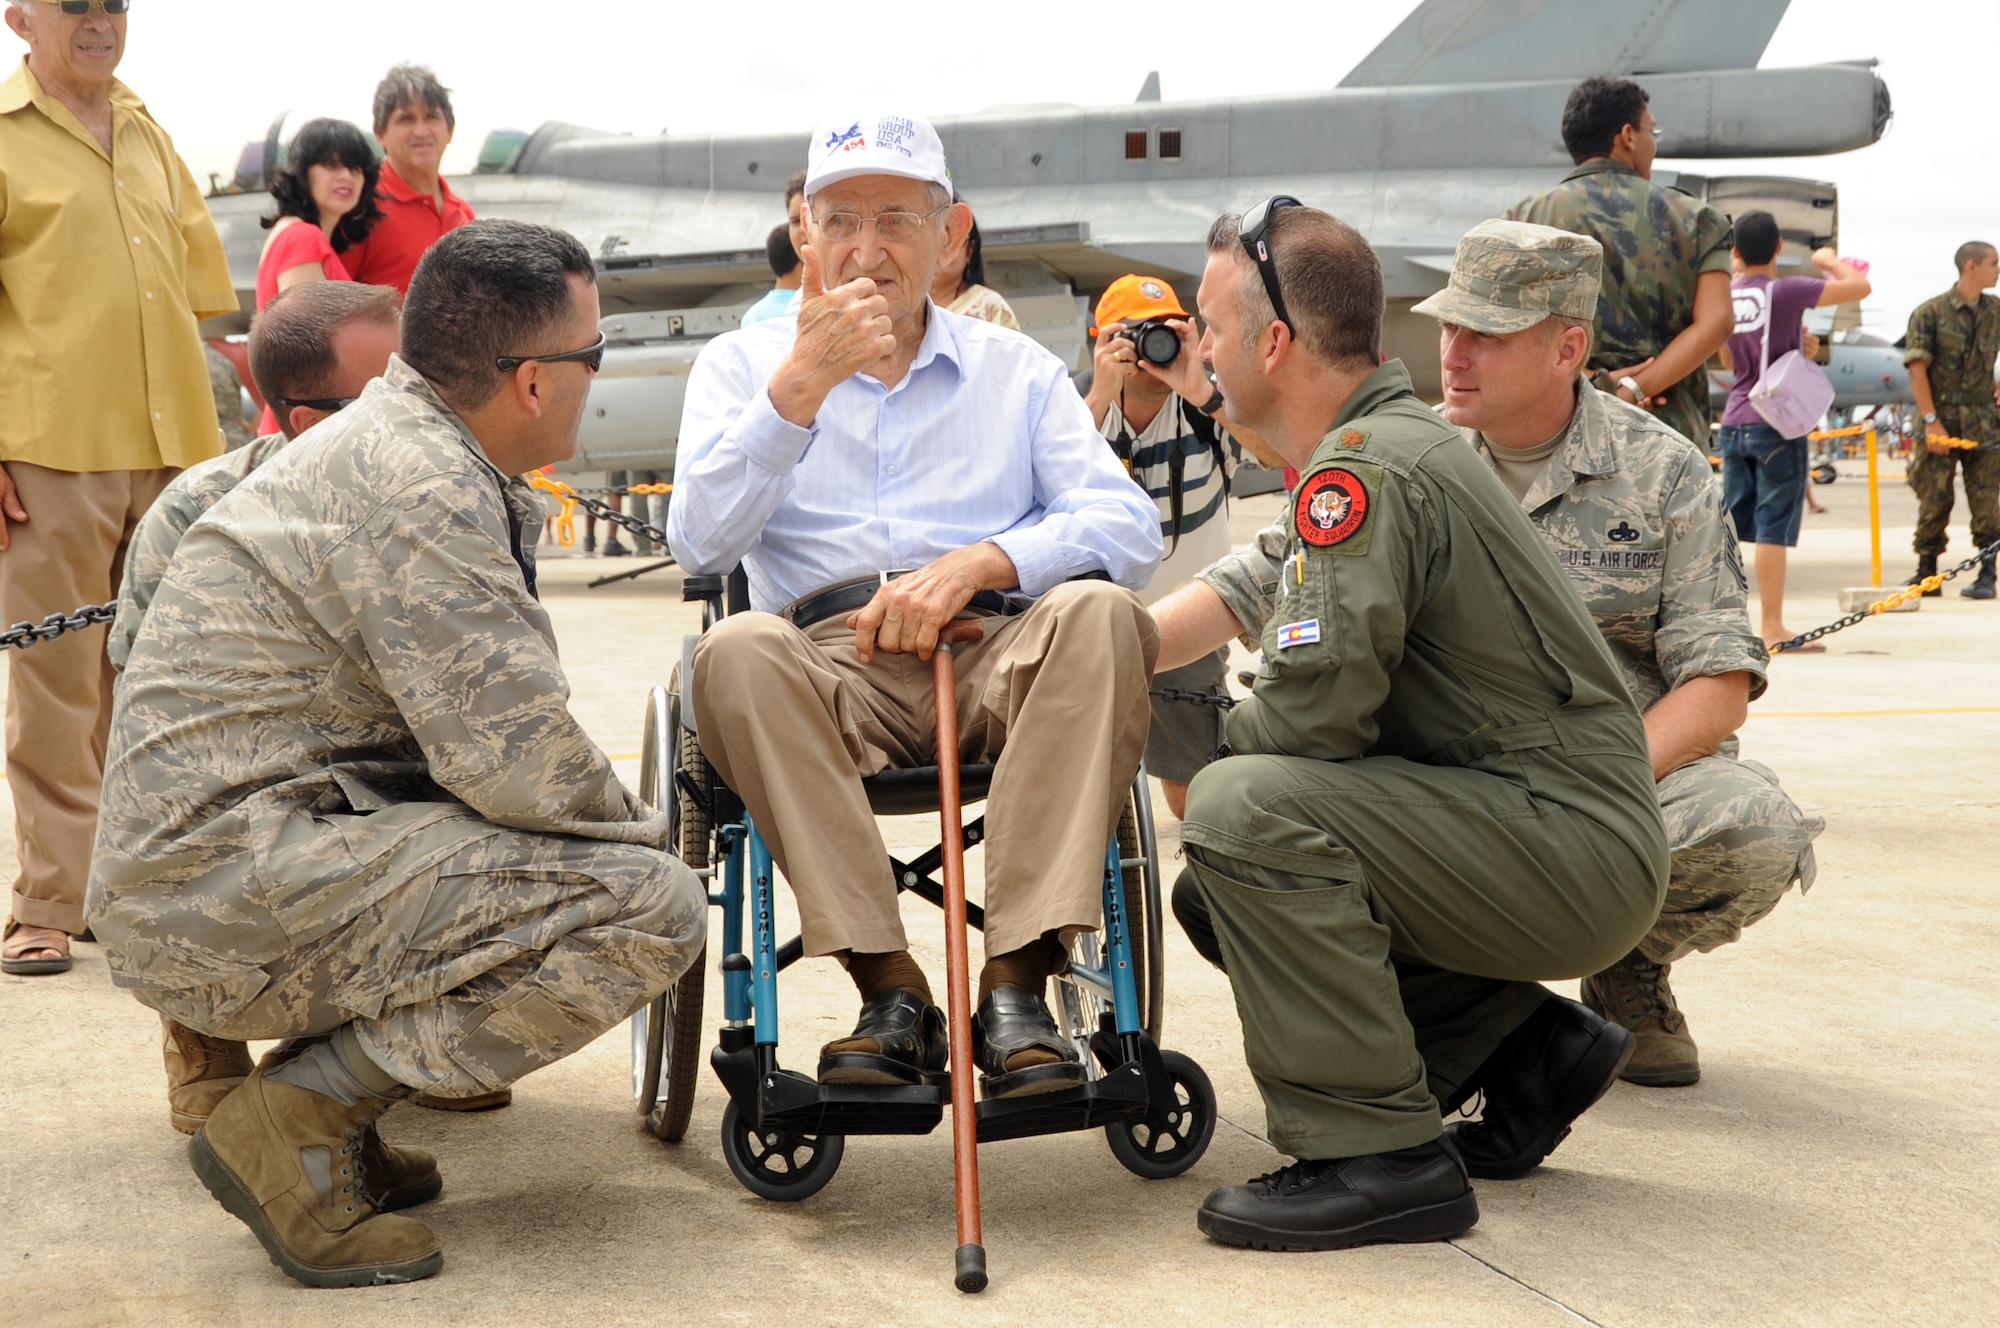 Emil Anthony Petr visits with members of the 161st Air Refueling Wing, Phoenix, Arizona and the 140th Wing, Buckley, Colorado, during an open house at Natal Air Base, Brazil in conjunction with CRUZEX V. Mr. Petr is a World War II veteran who currently lives in Natal. CRUZEX, or Cruzeiro Do Sul (Southern Cross), is a multi-national combined exercise involving the Air Forces of Argentina, Brazil, Chile, France and Uruguay, and observers from numerous other countries with more than 82 aircraft and almost 3,000 Airmen involved. (U.S. Air Force photo/Staff Sgt. Michael Matkin)